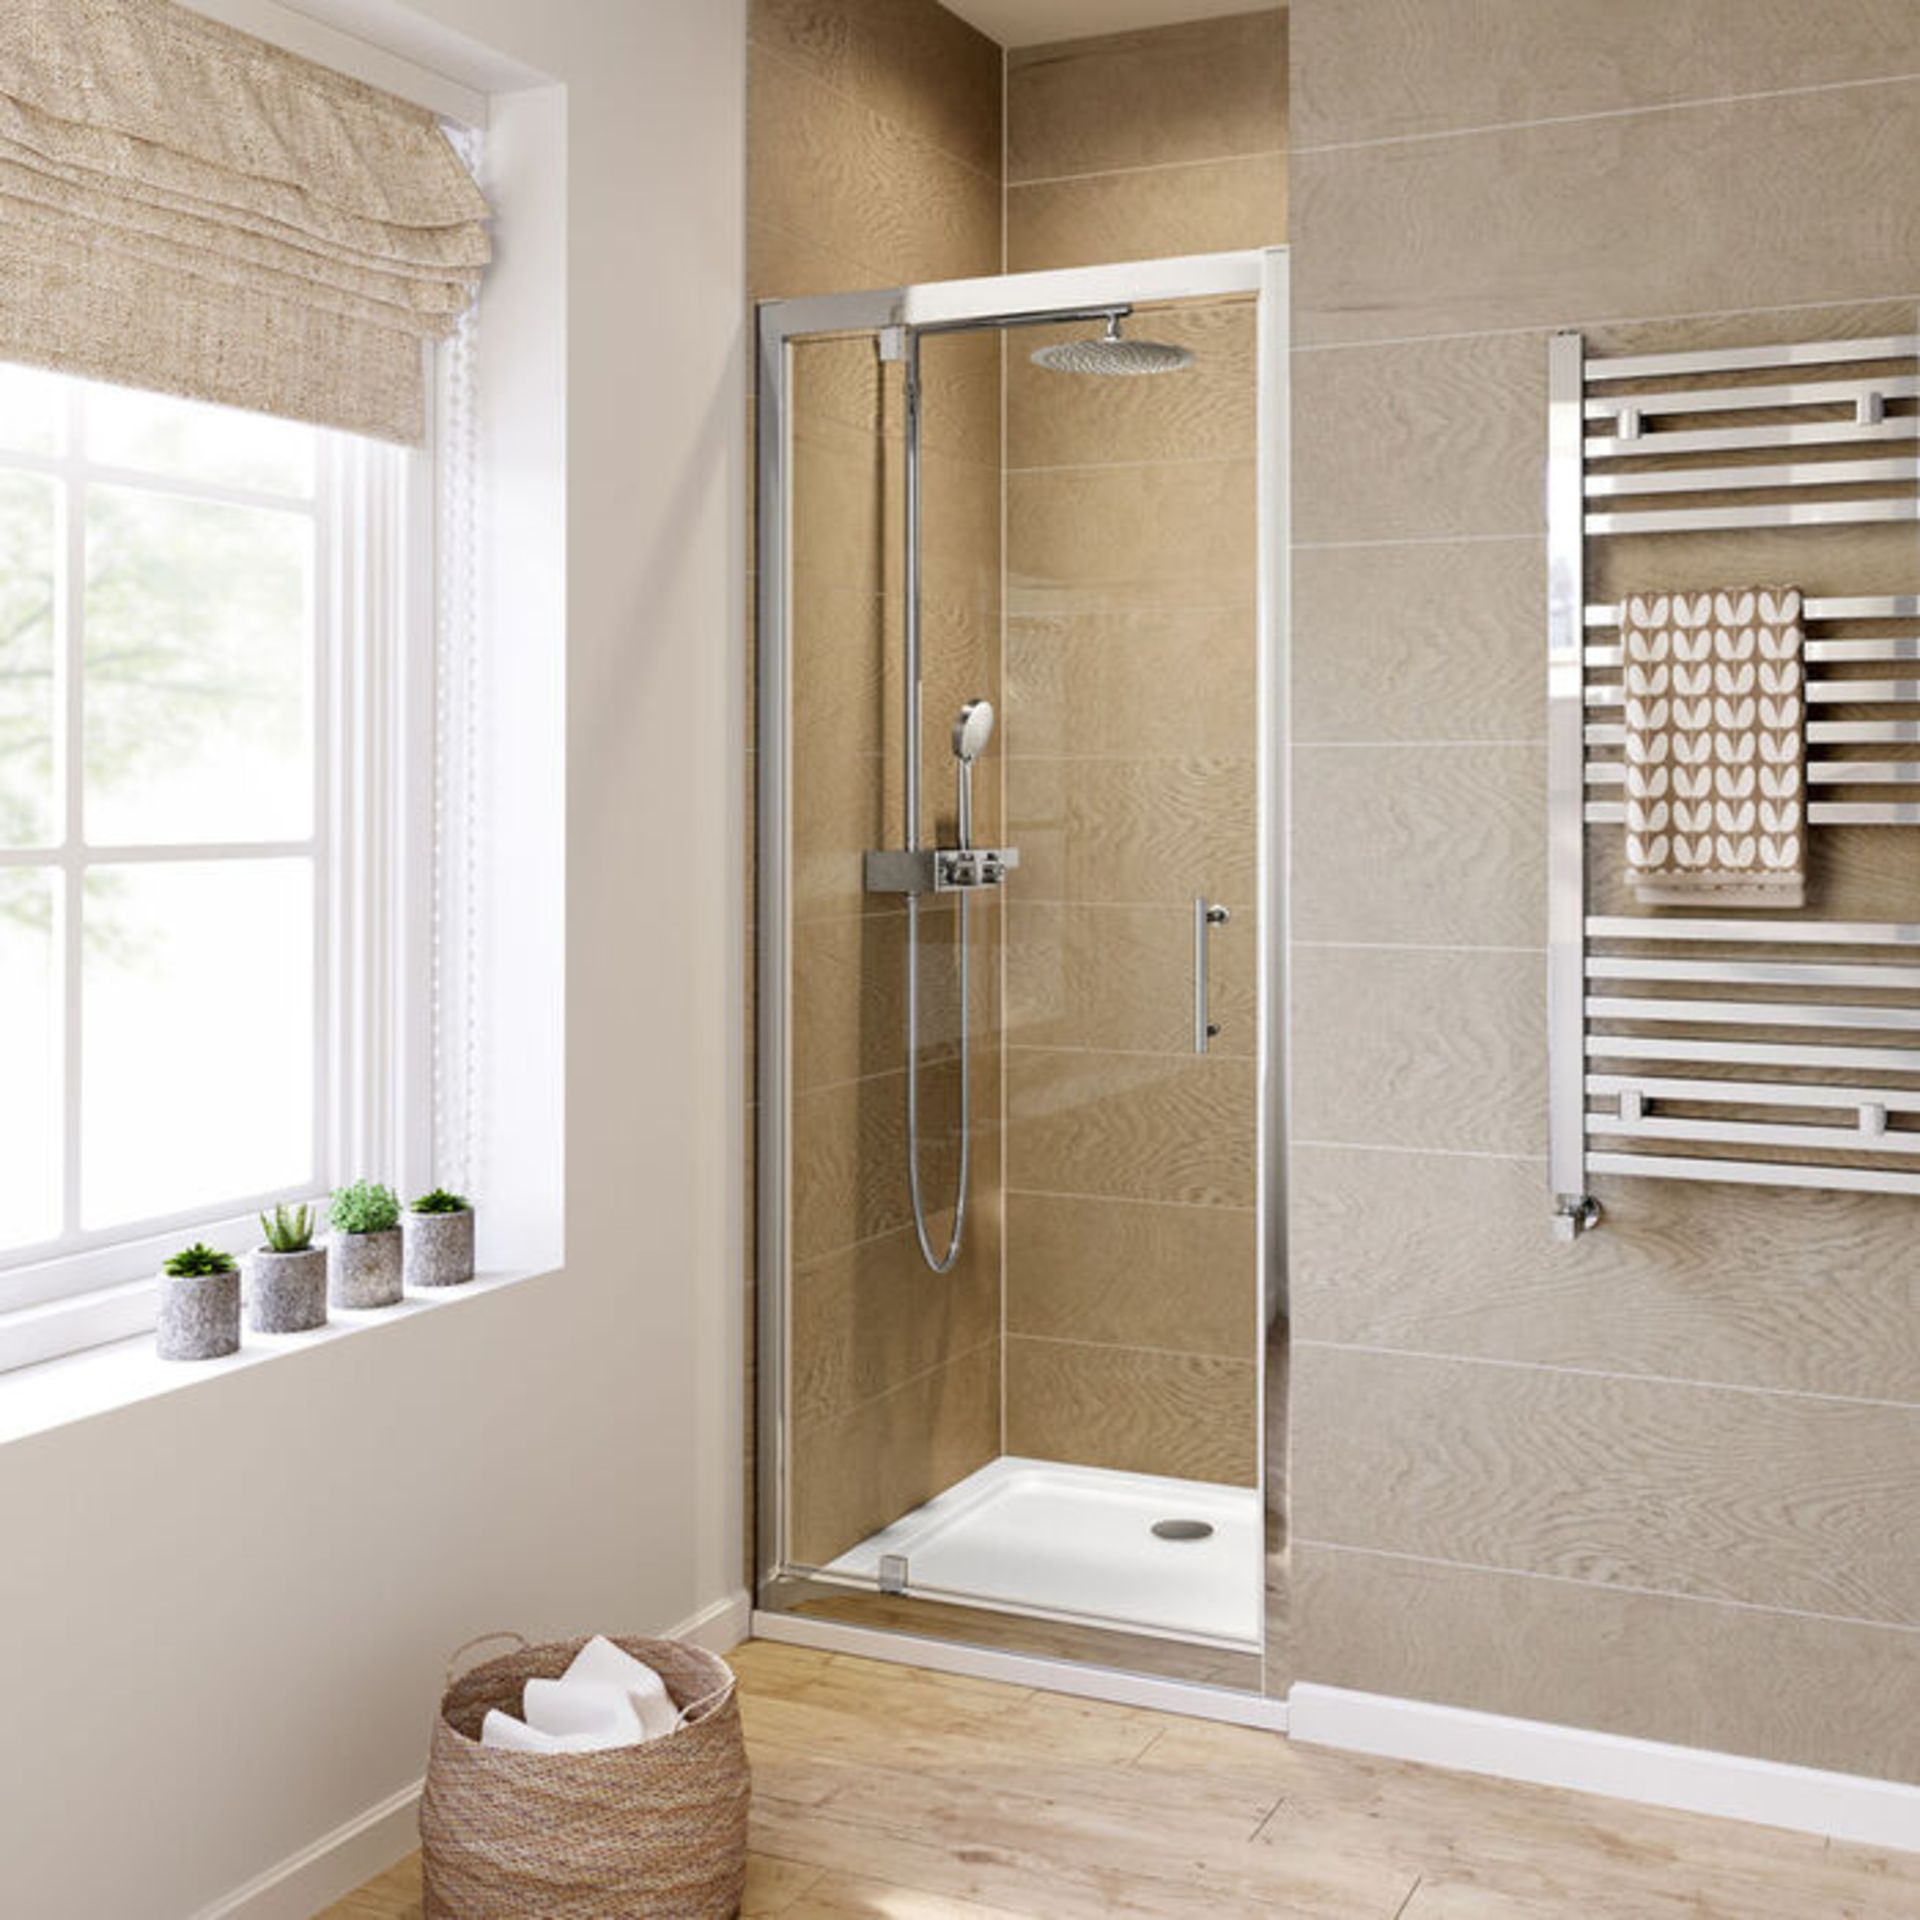 (TT43) 800mm - 6mm Elements Pivot Shower Door. RRP £299.99. 6mm Safety Glass Fully waterproof... - Image 3 of 3